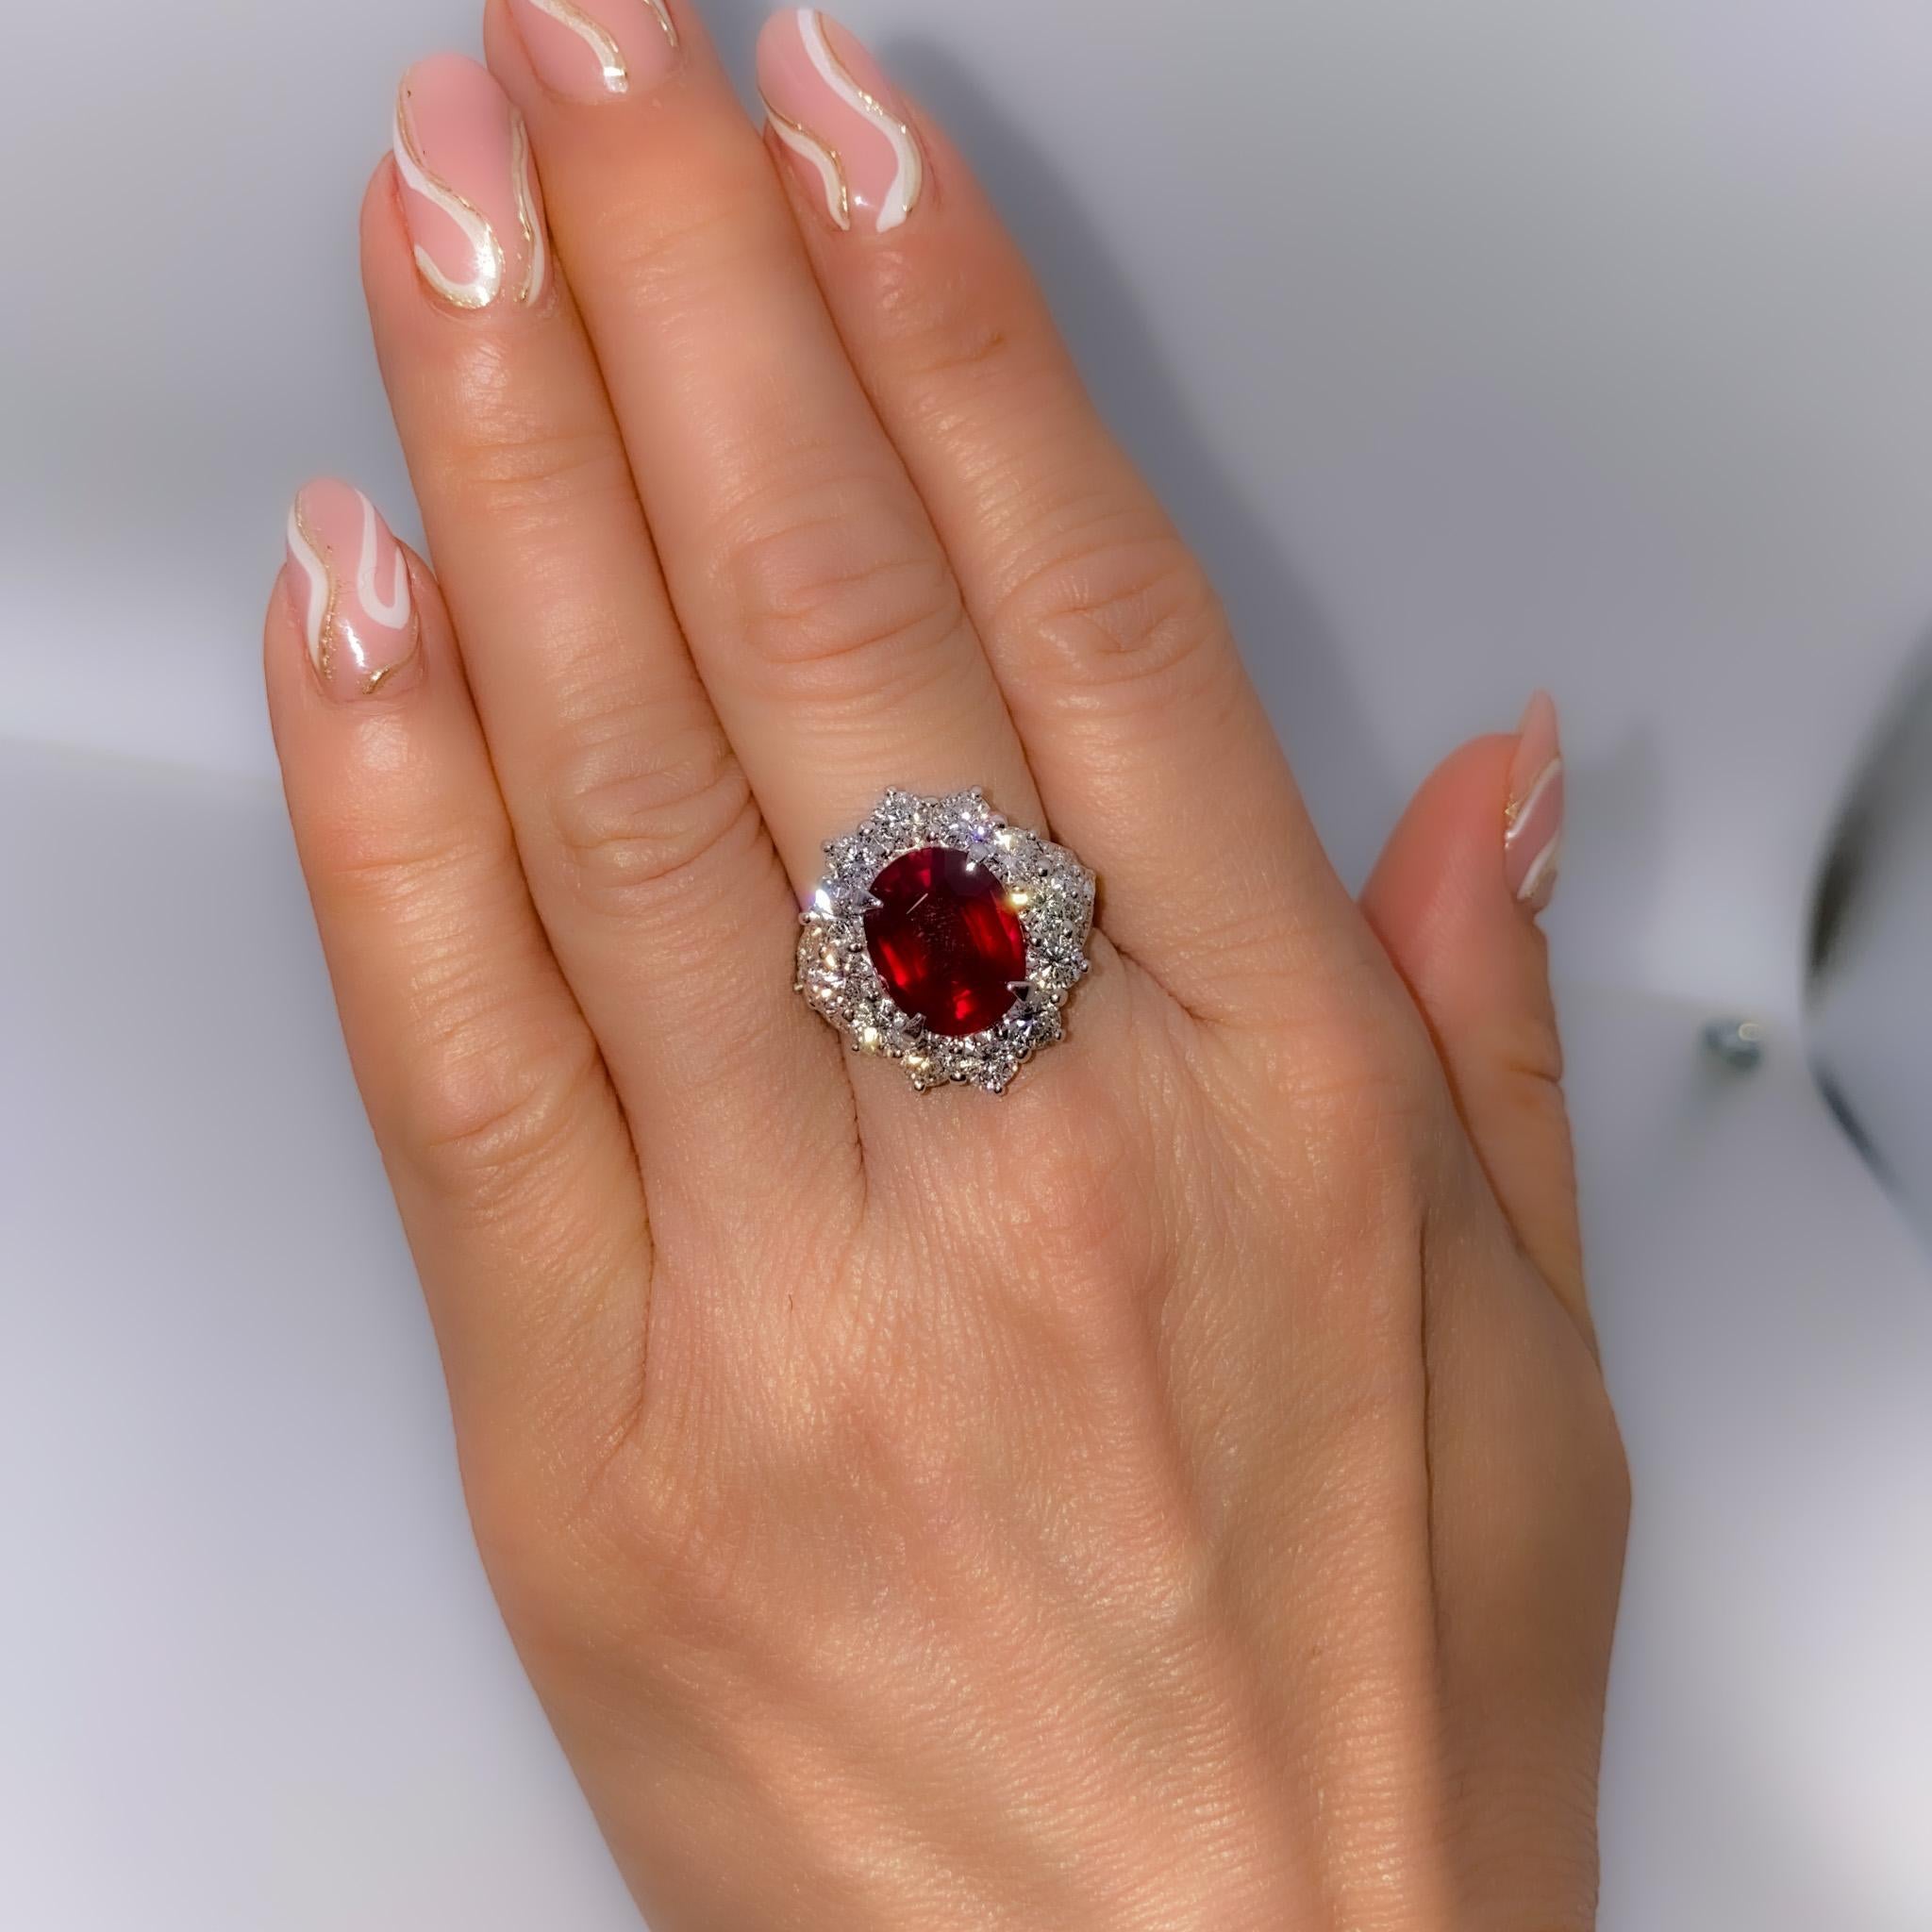 A beautiful 5.24-carat Unheated Vivid Red ruby from Mozambique is set along with 2.67 carats of diamonds in this PT ring. Ever classical and a great investment piece, this piece is a head-turner. This piece will come with a GRS report